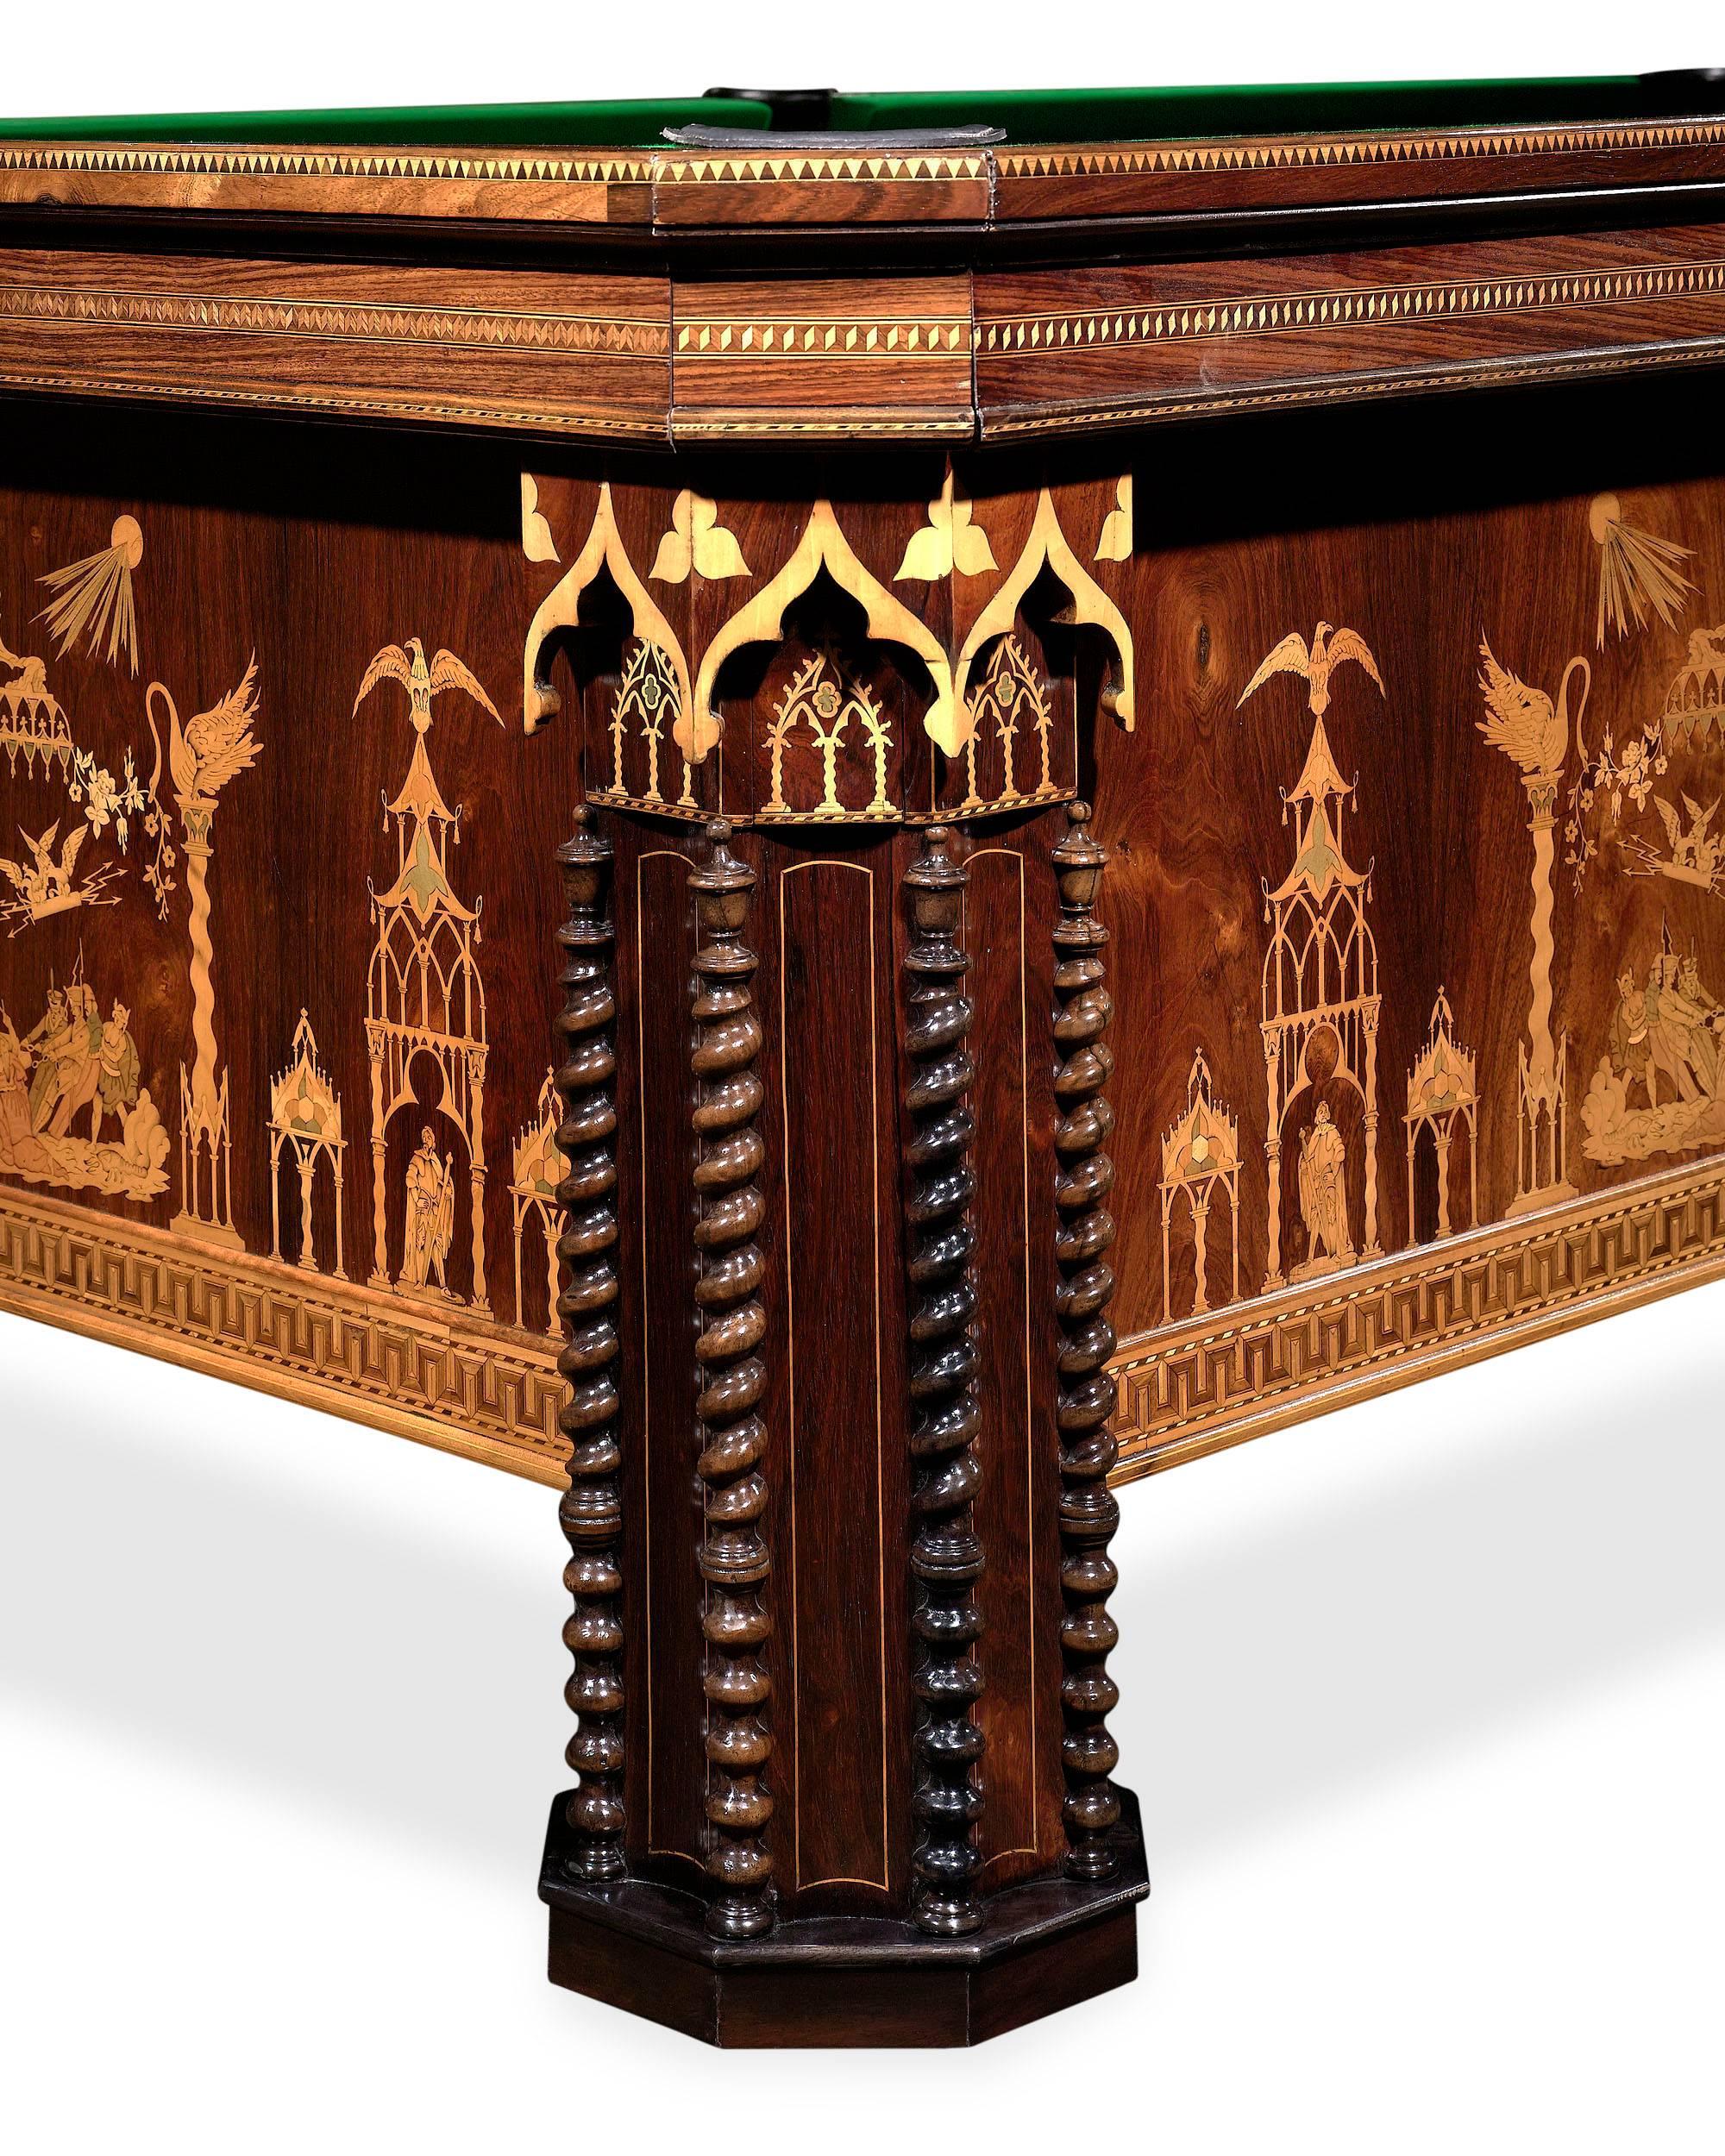 Exceptionally rare and beautifully constructed, this French billiards table is amongst the most remarkable and exquisite we have ever had the pleasure to offer. Crafted of opulent rosewood with the utmost attention to detail, the table is a